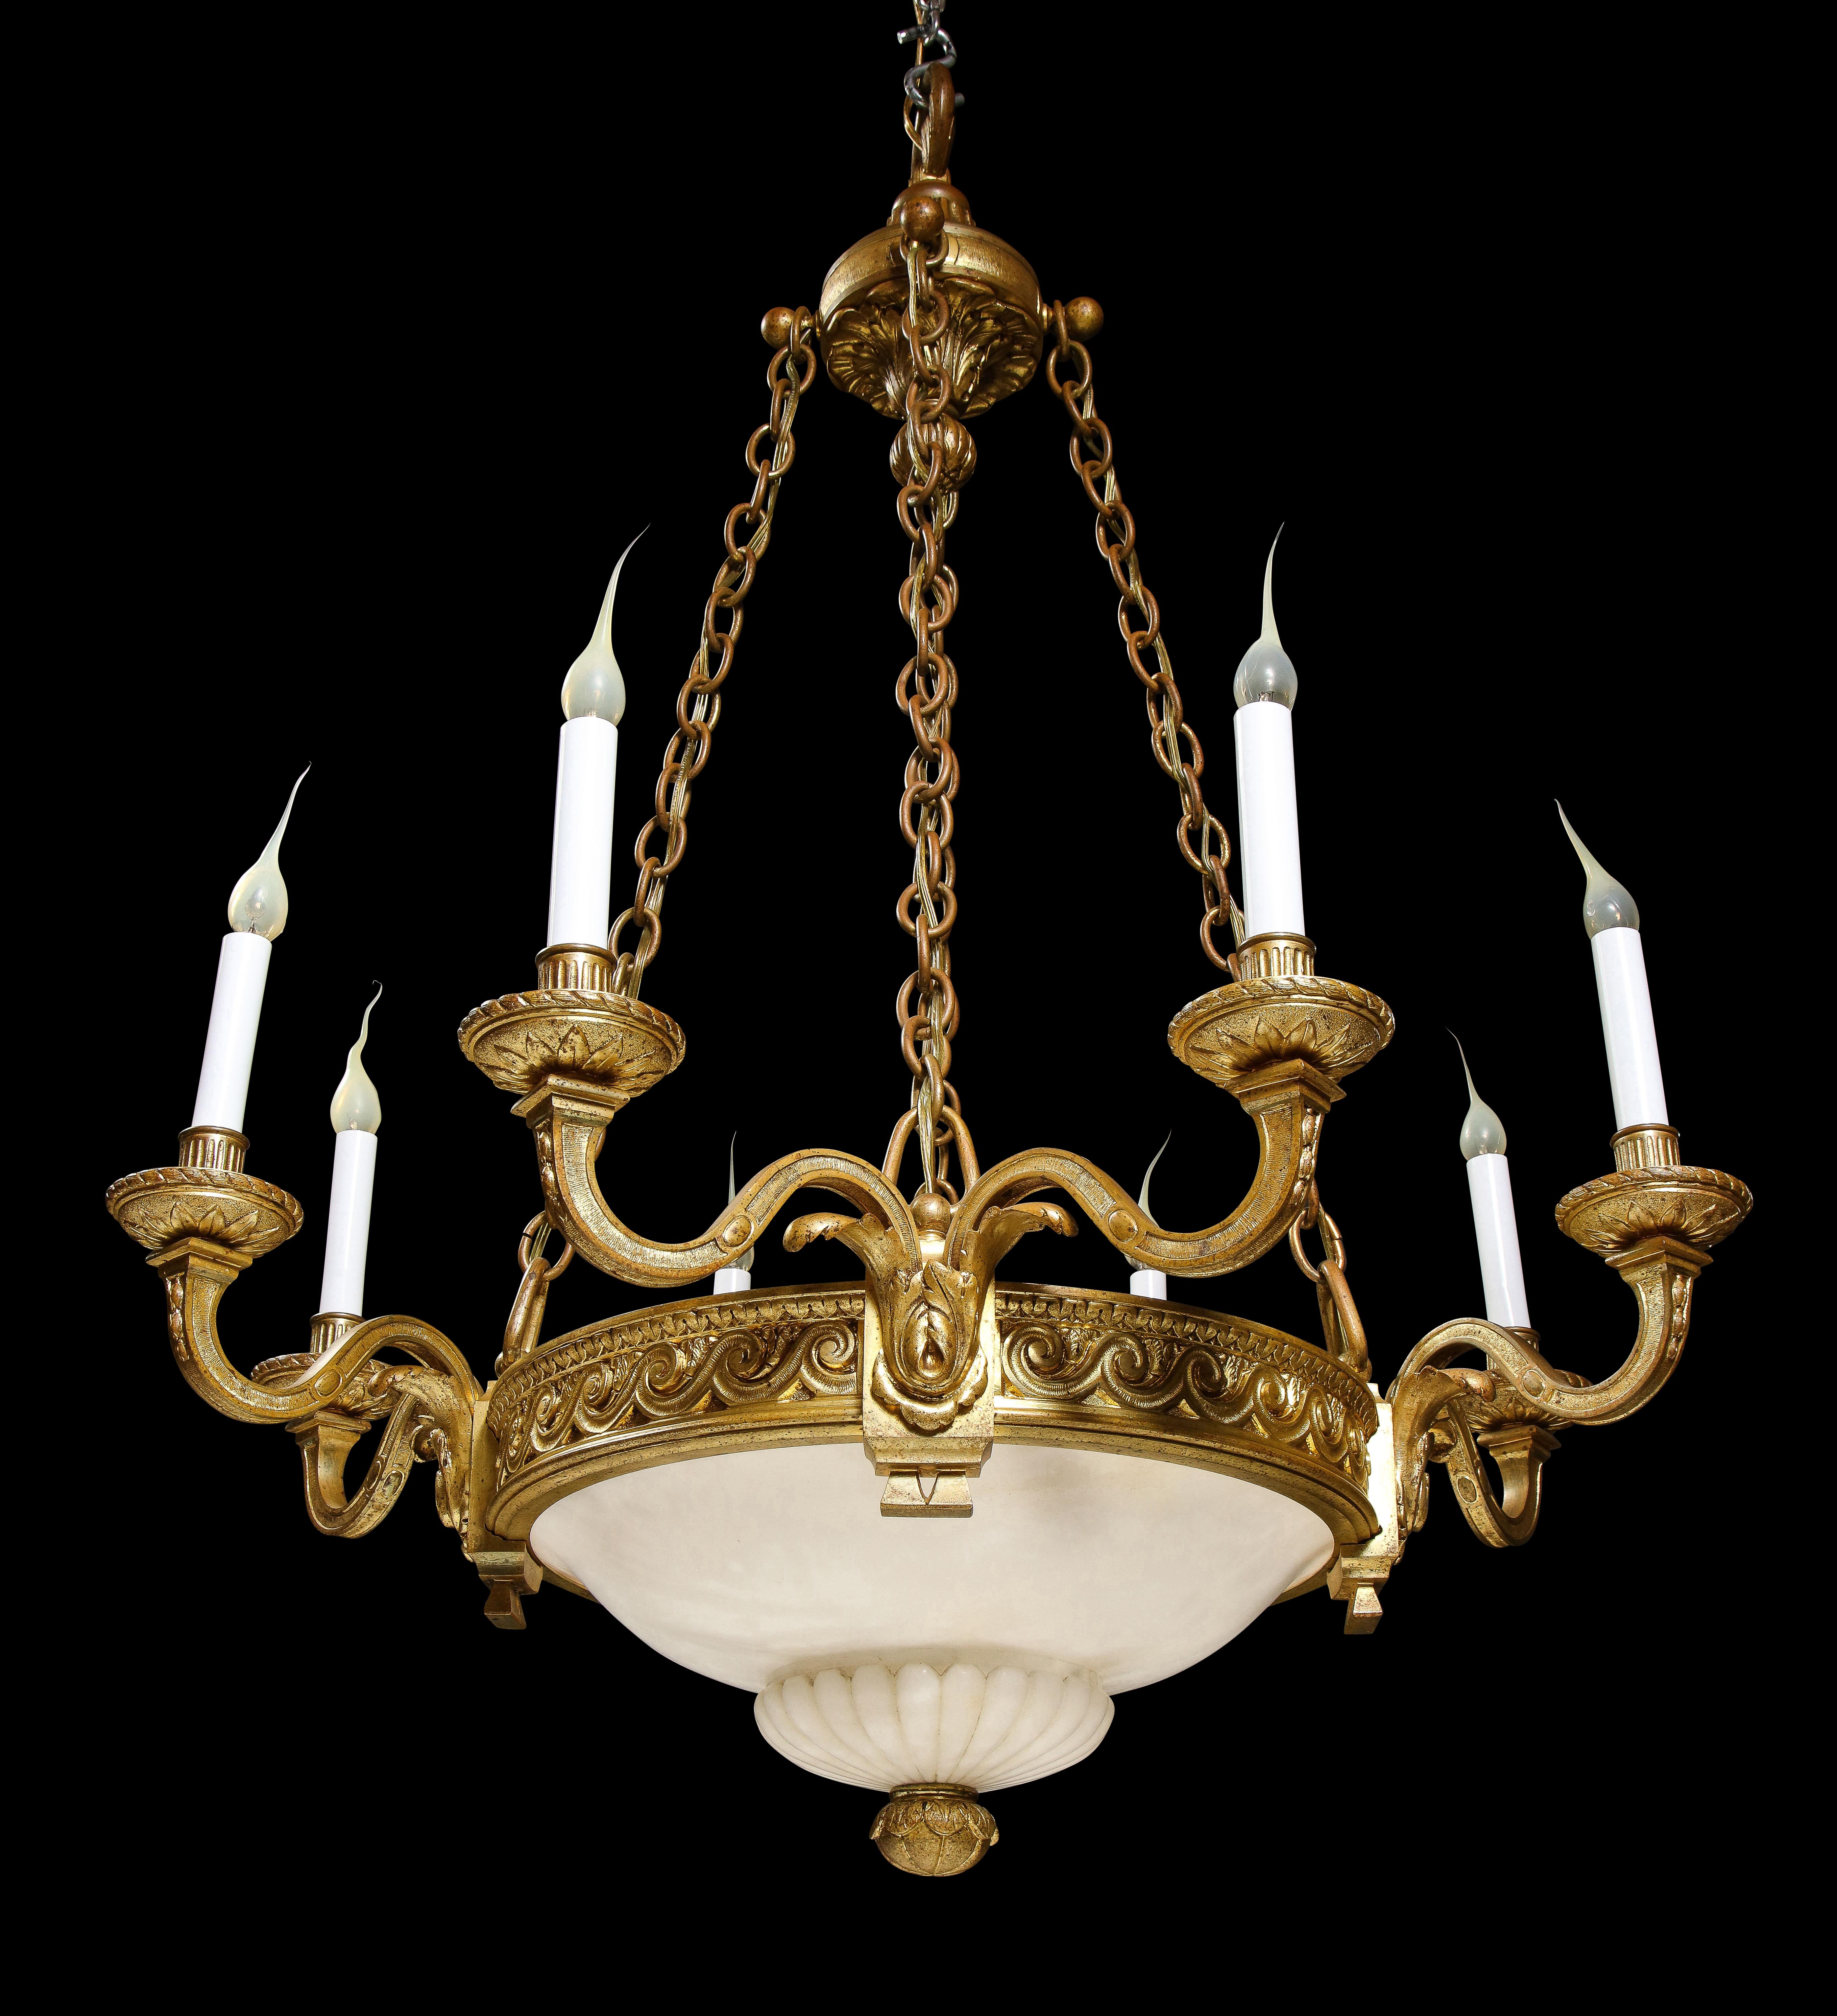 A French Louis XVI Style Gilt Bronze & Carved Alabaster Chandelier In Good Condition For Sale In New York, NY